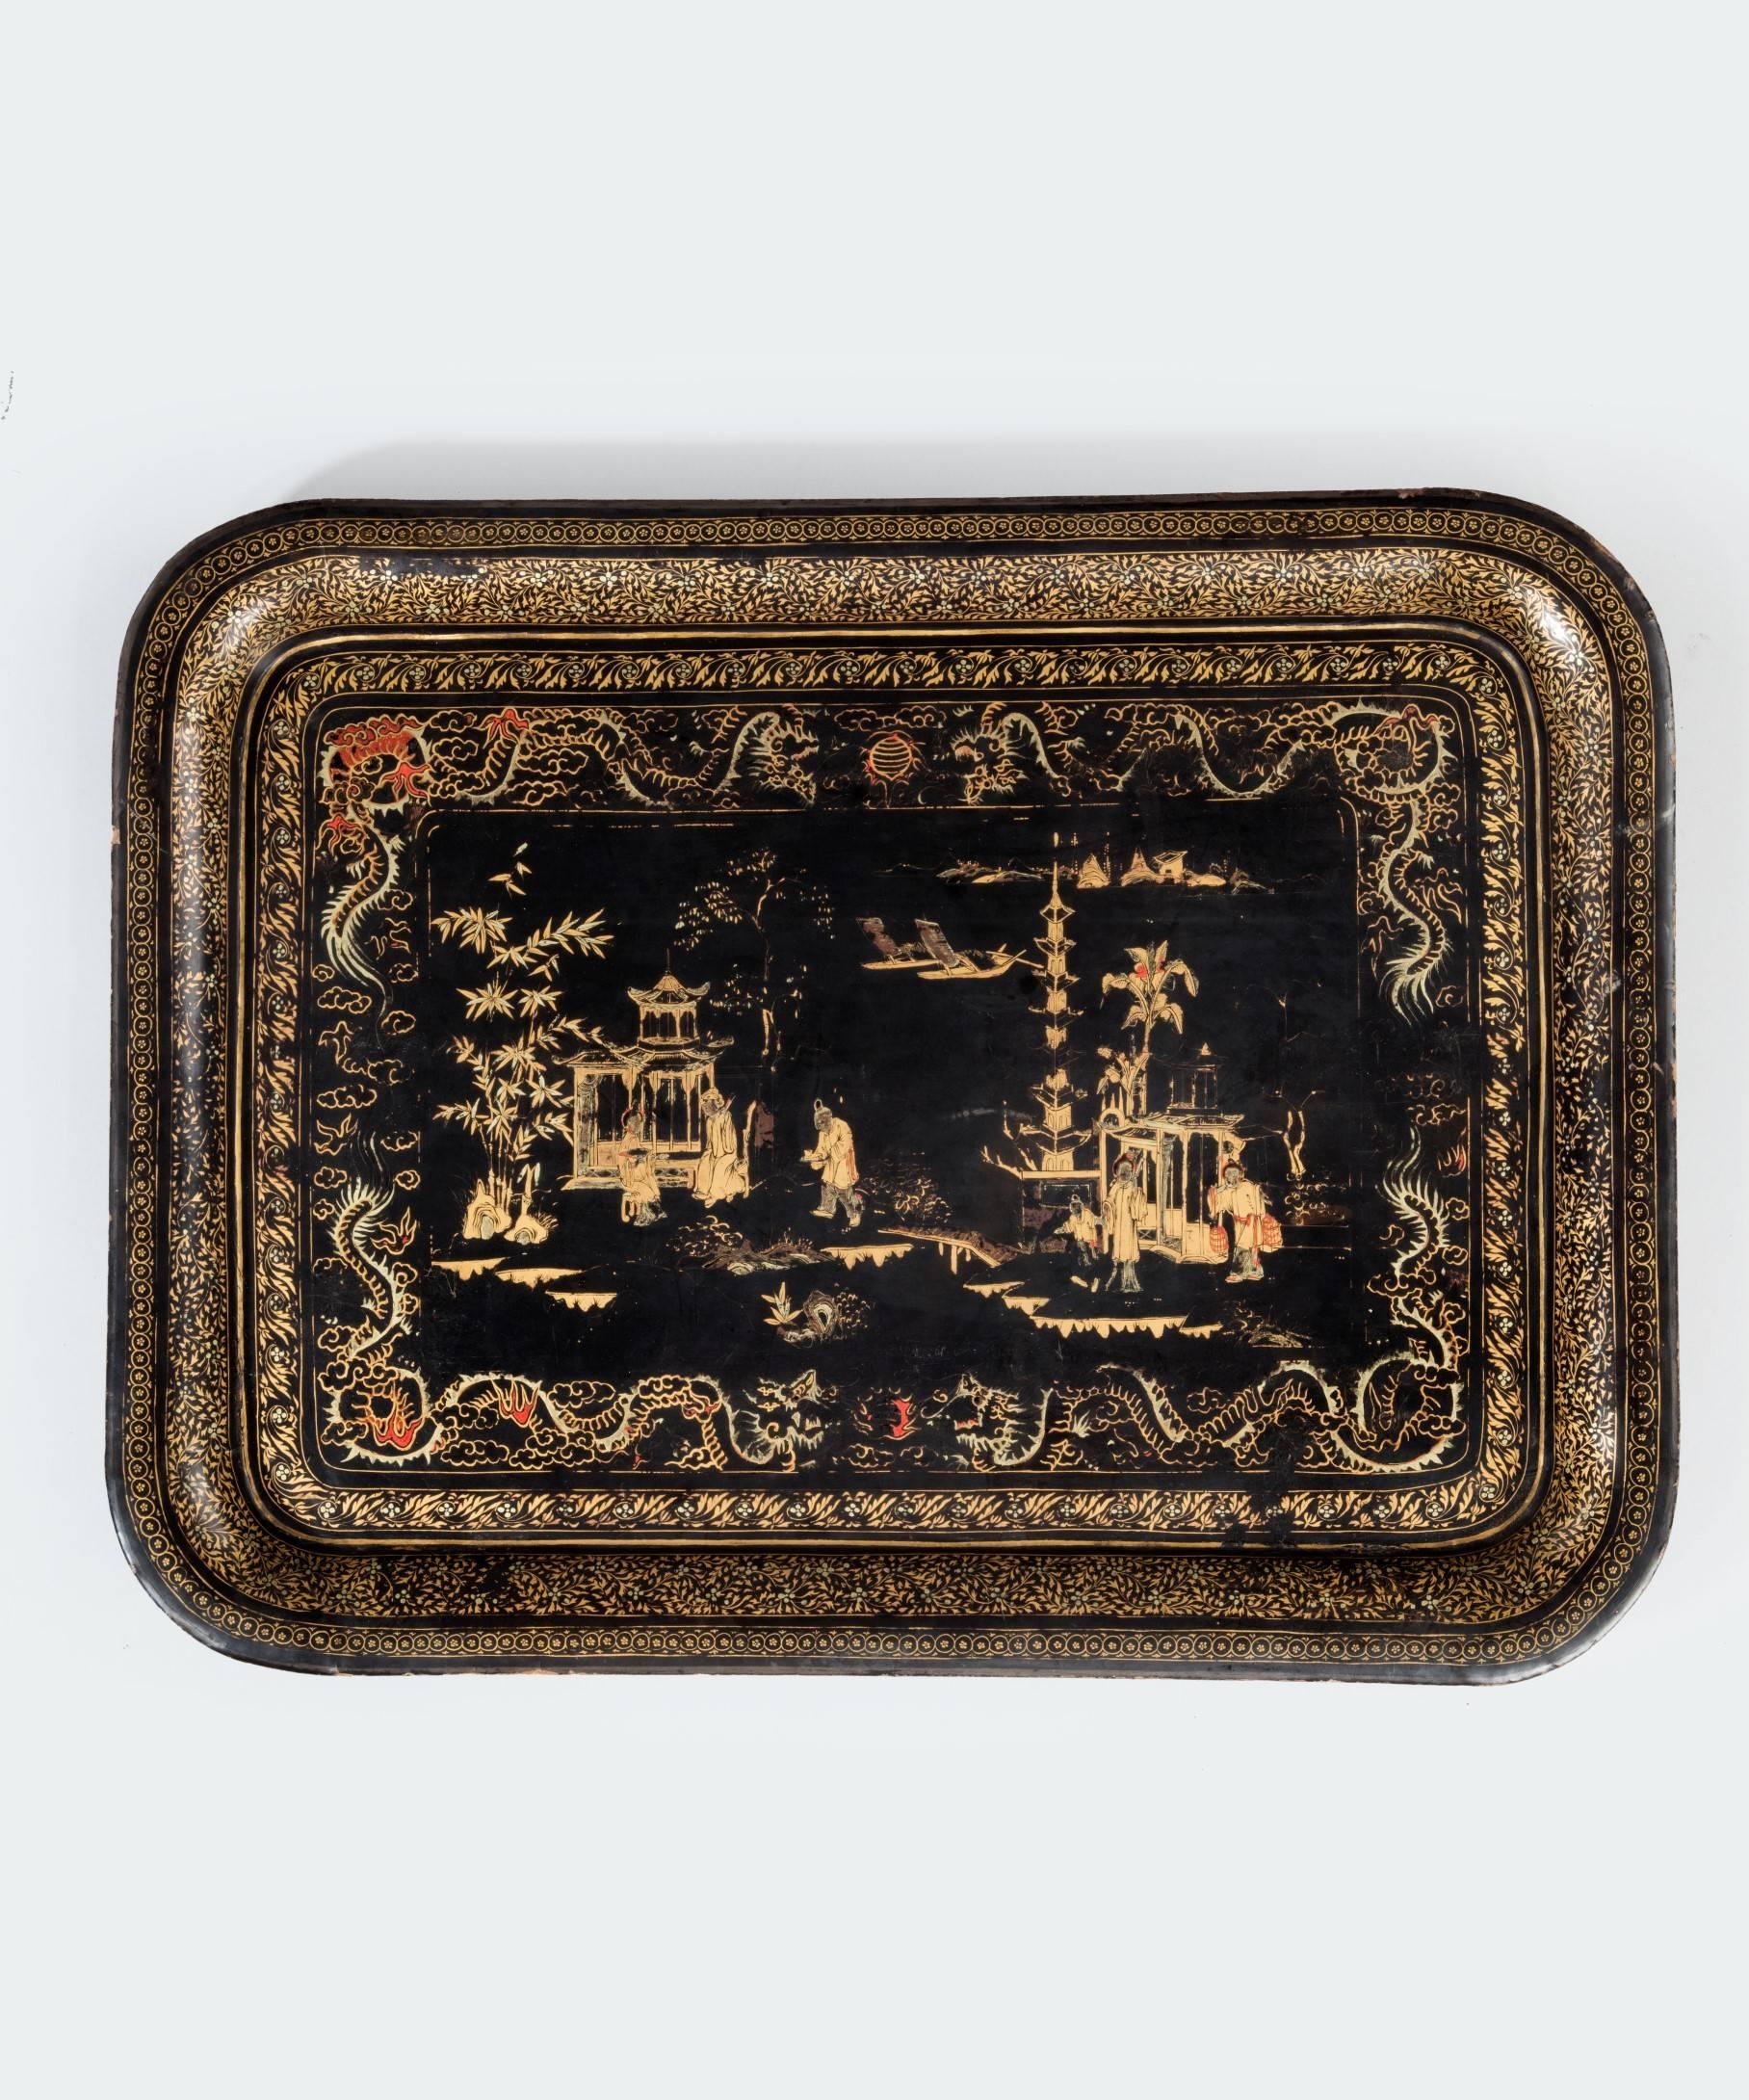 A rare set of three early 19th century Chinese Export lacquerware trays; each having a central scene of a Chinese landscape with figures and then decorated with borders of dragons and foliage all in gilt on a black ground. It is exceptionally rare